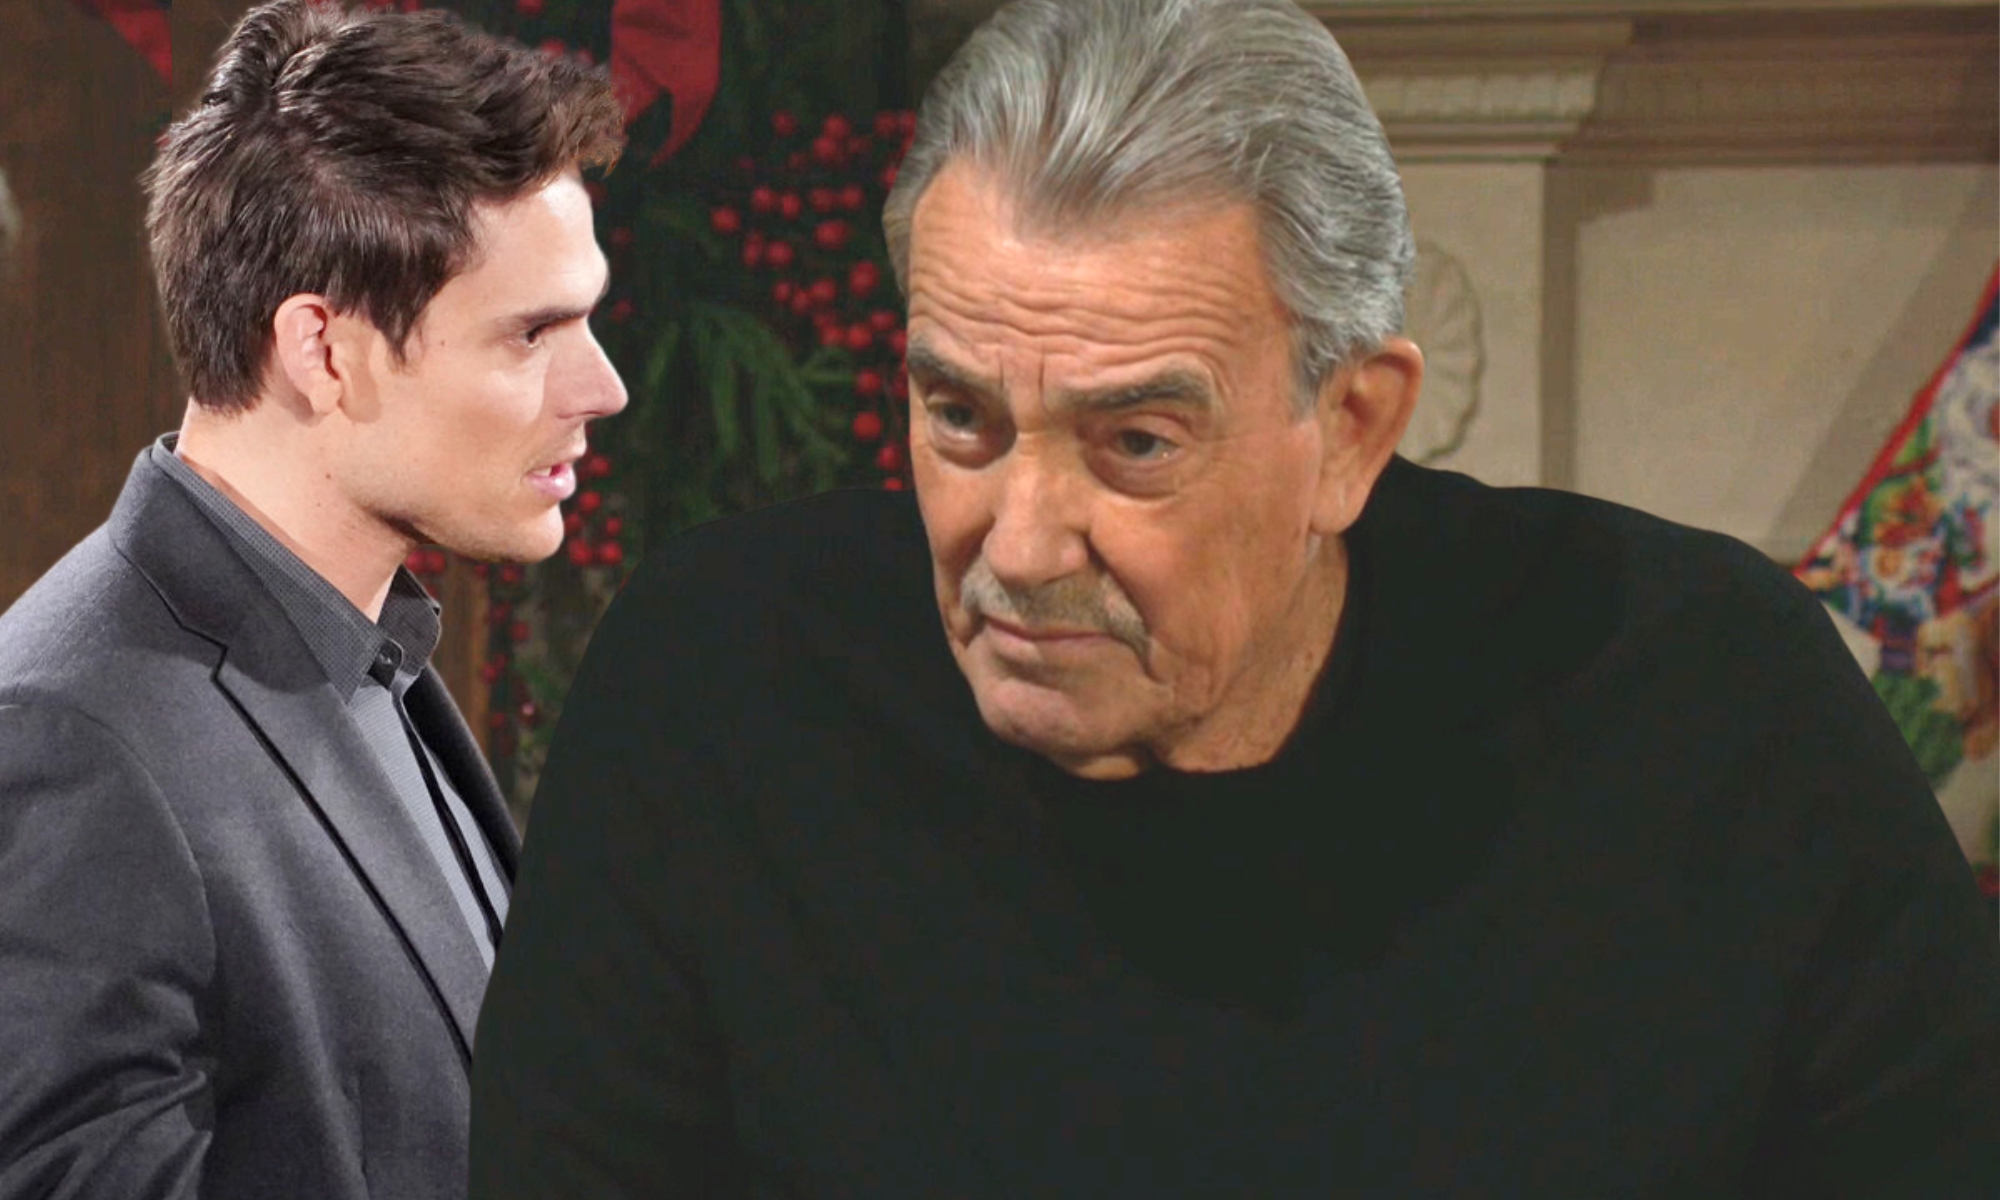 victor newman in black is looking at a confused adam newman in grey